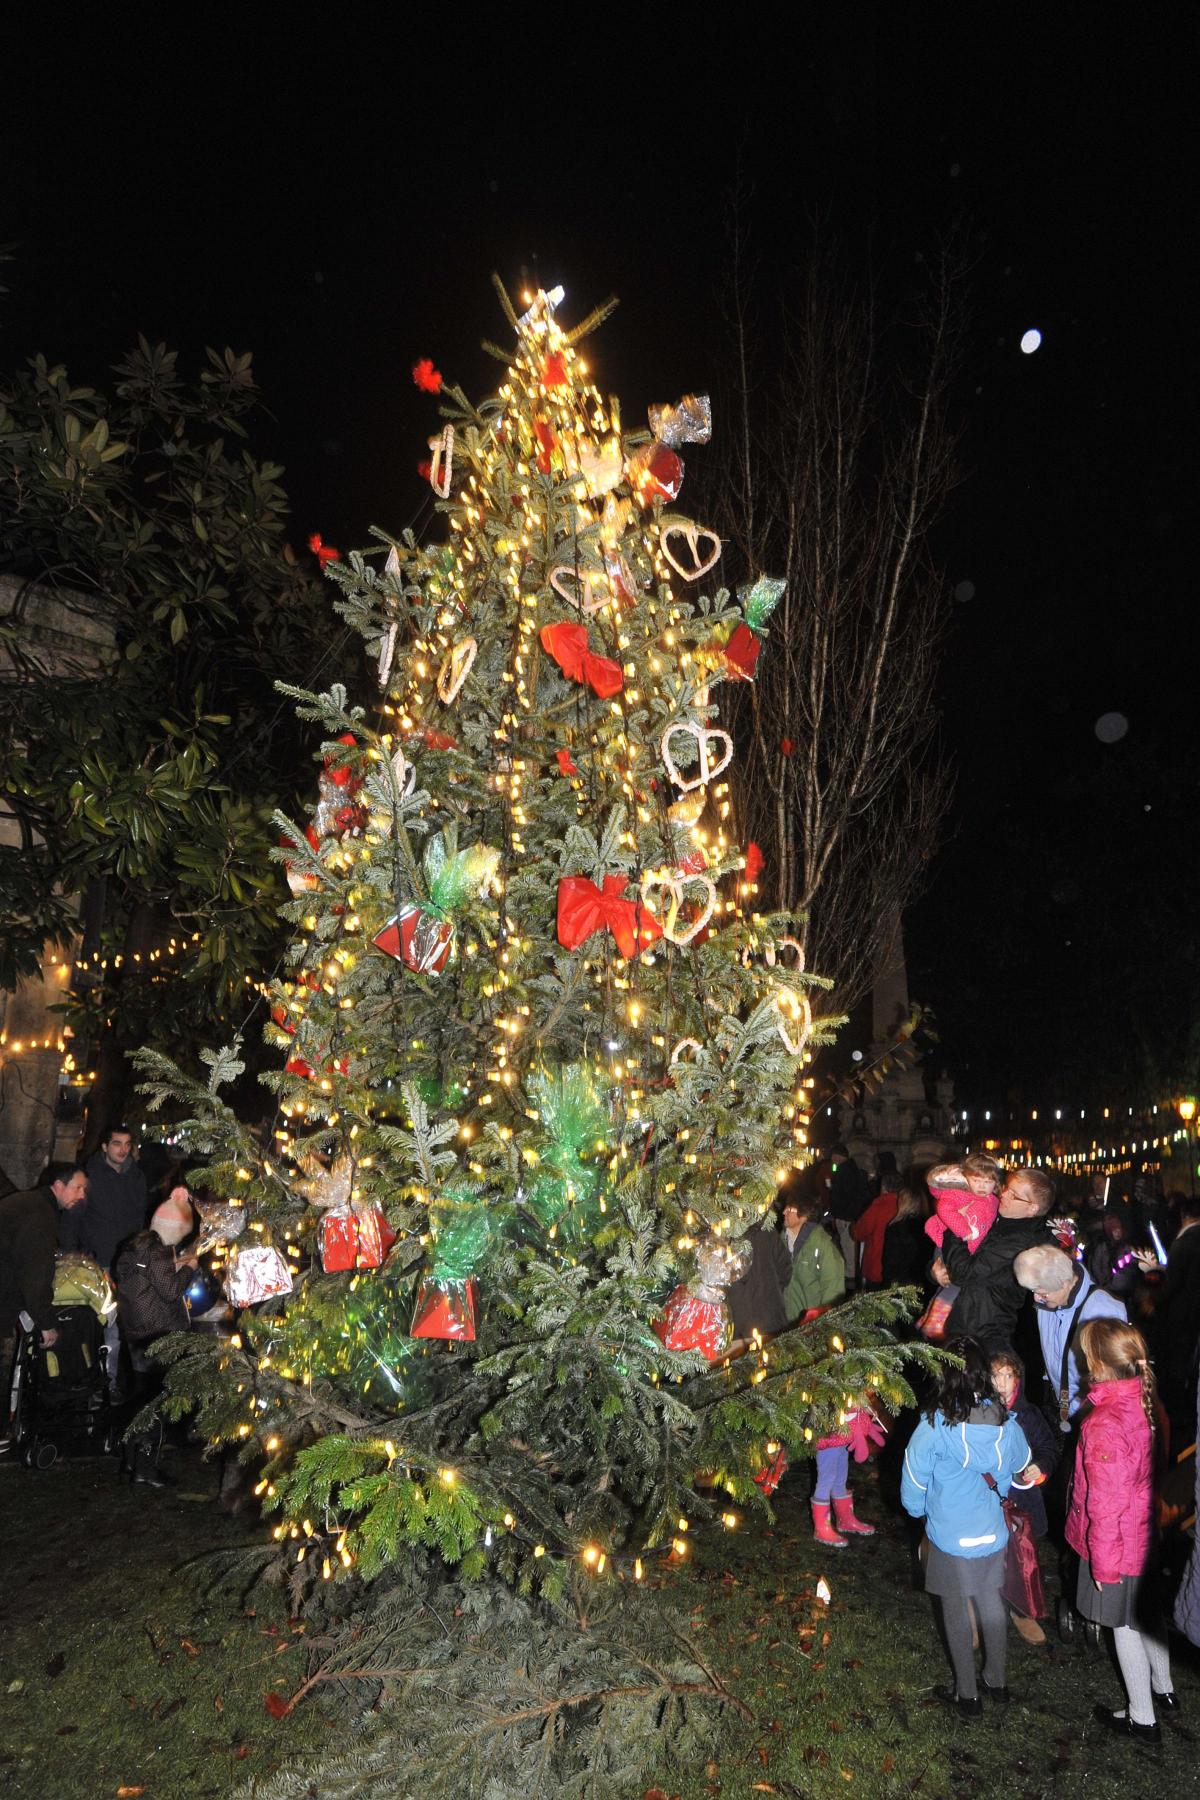 Bradford on Avon Christmas lights switch-on. Pictures by Glenn Phillips